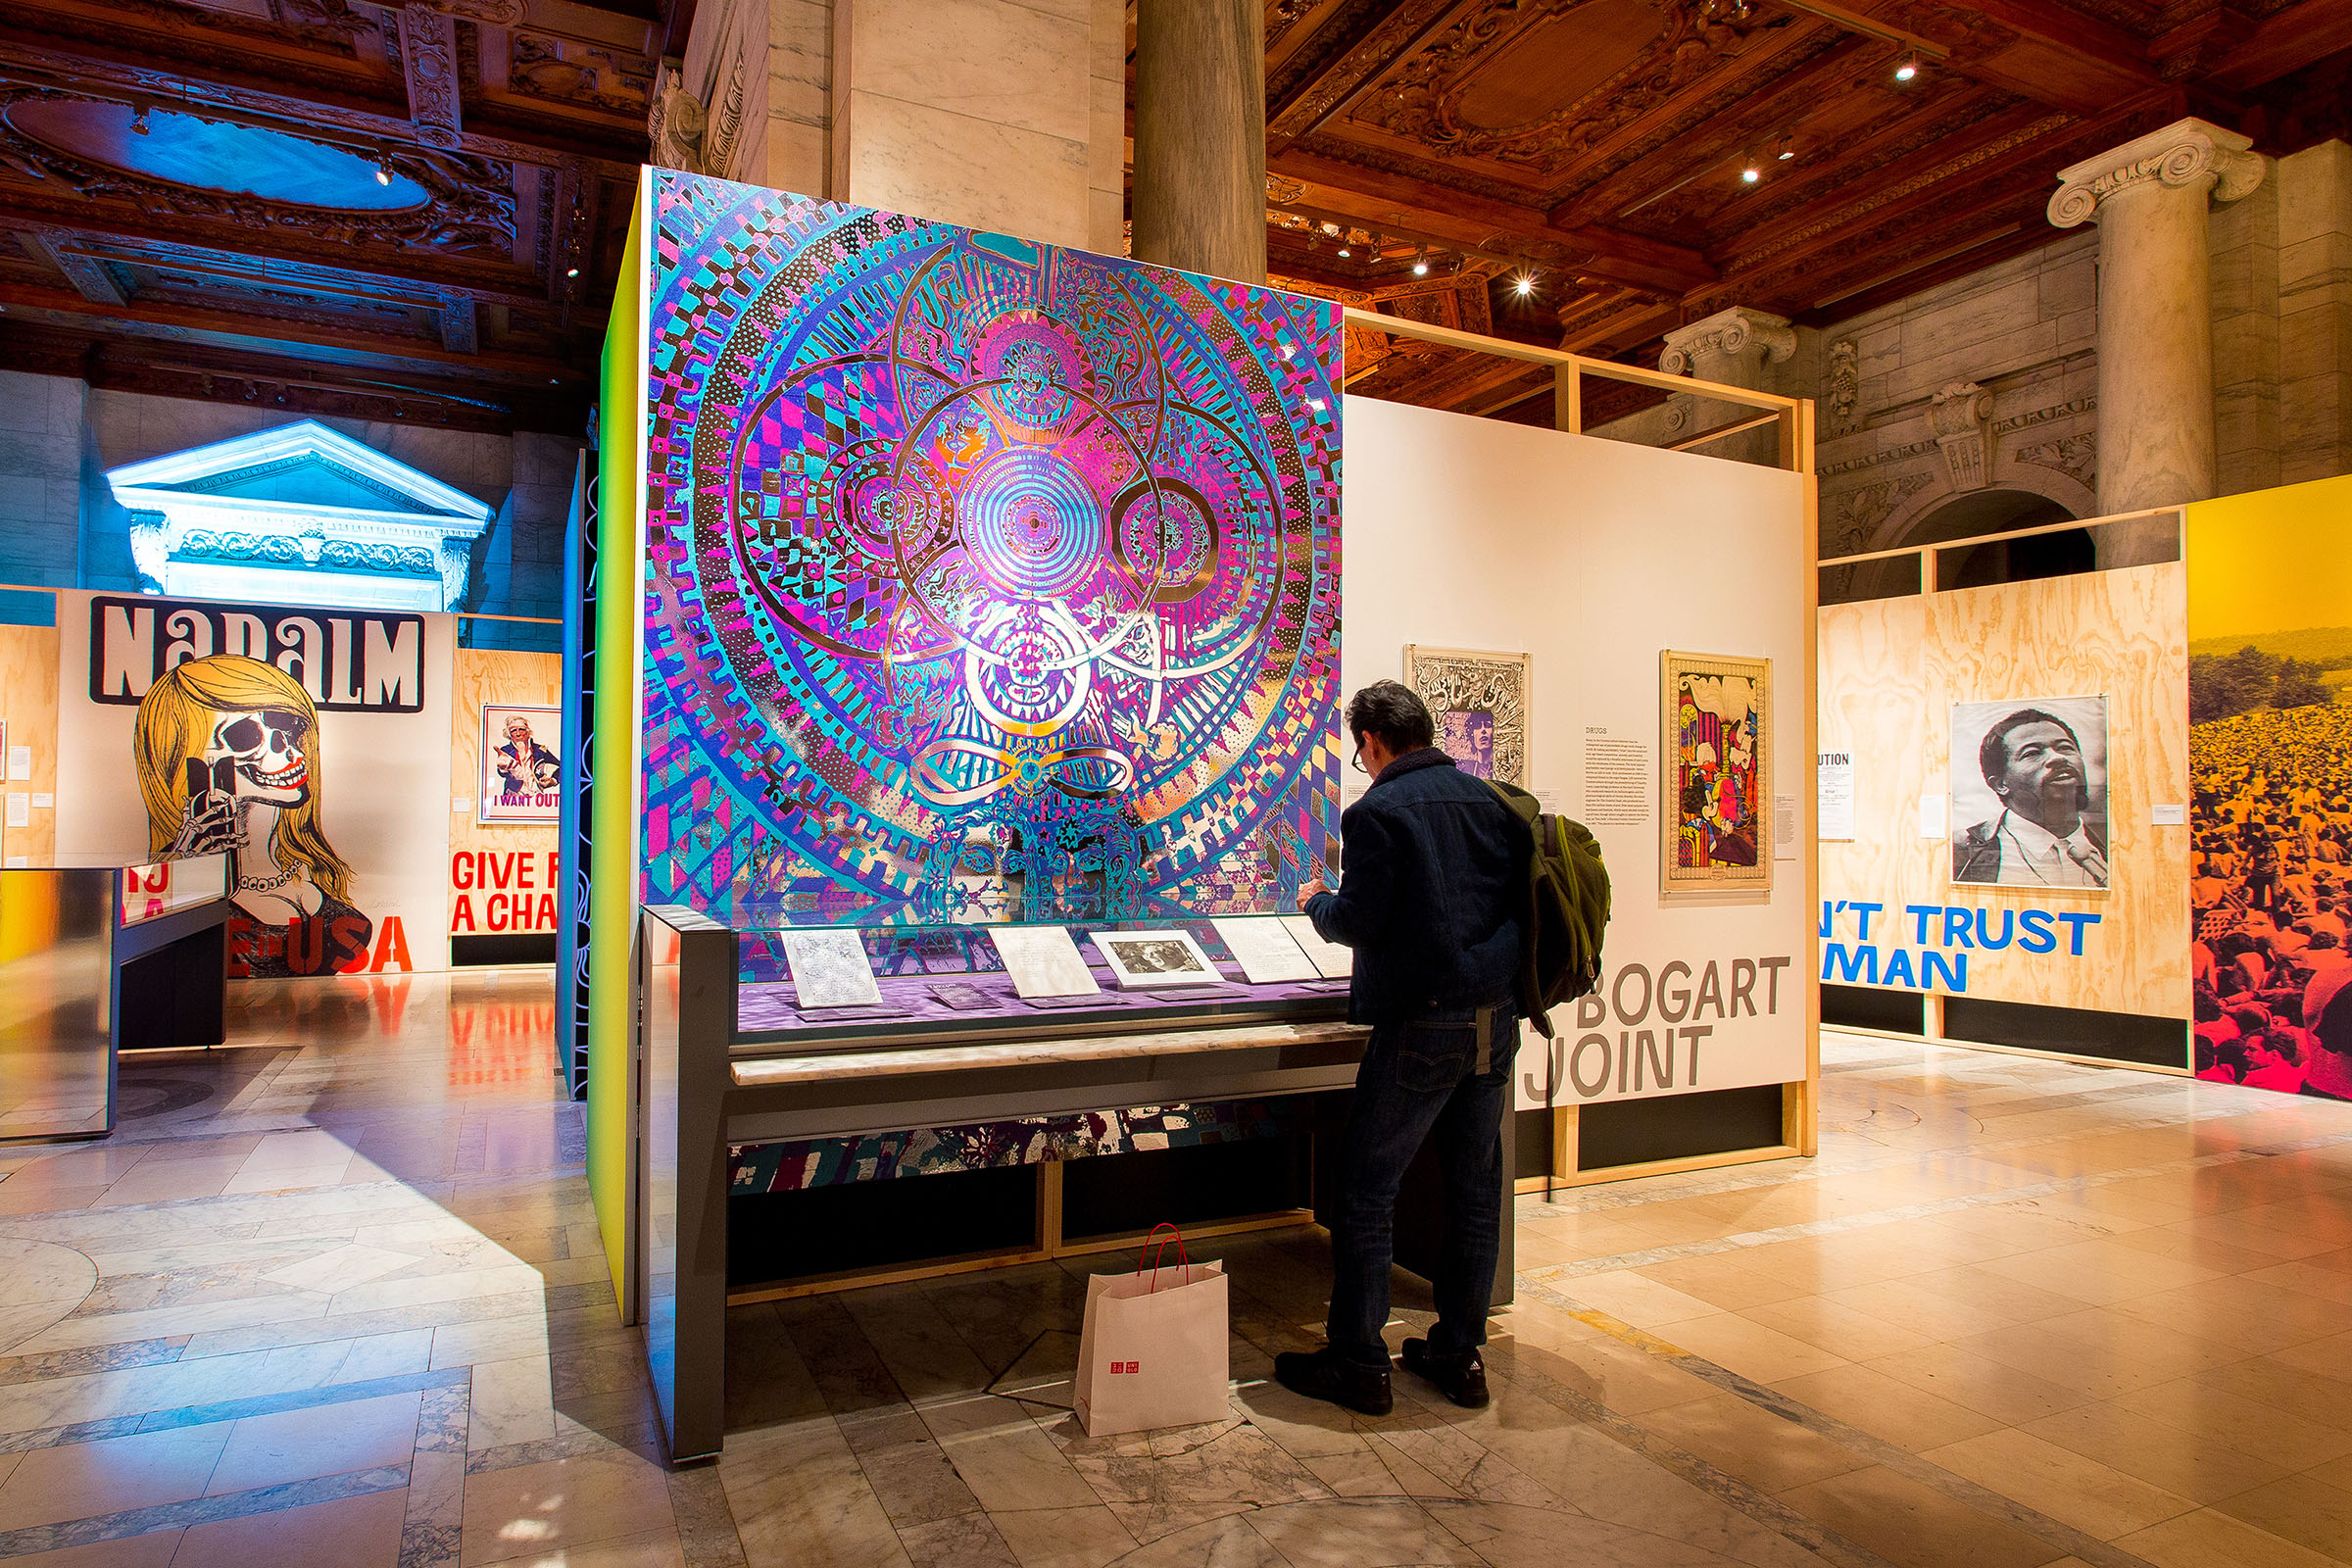 You Say You Want A Revolution - P+A used mirrored vinyl laid atop with graphics throughout the exhibit to convey psychedelia and the kaleidoscopic nature of the counterculture.